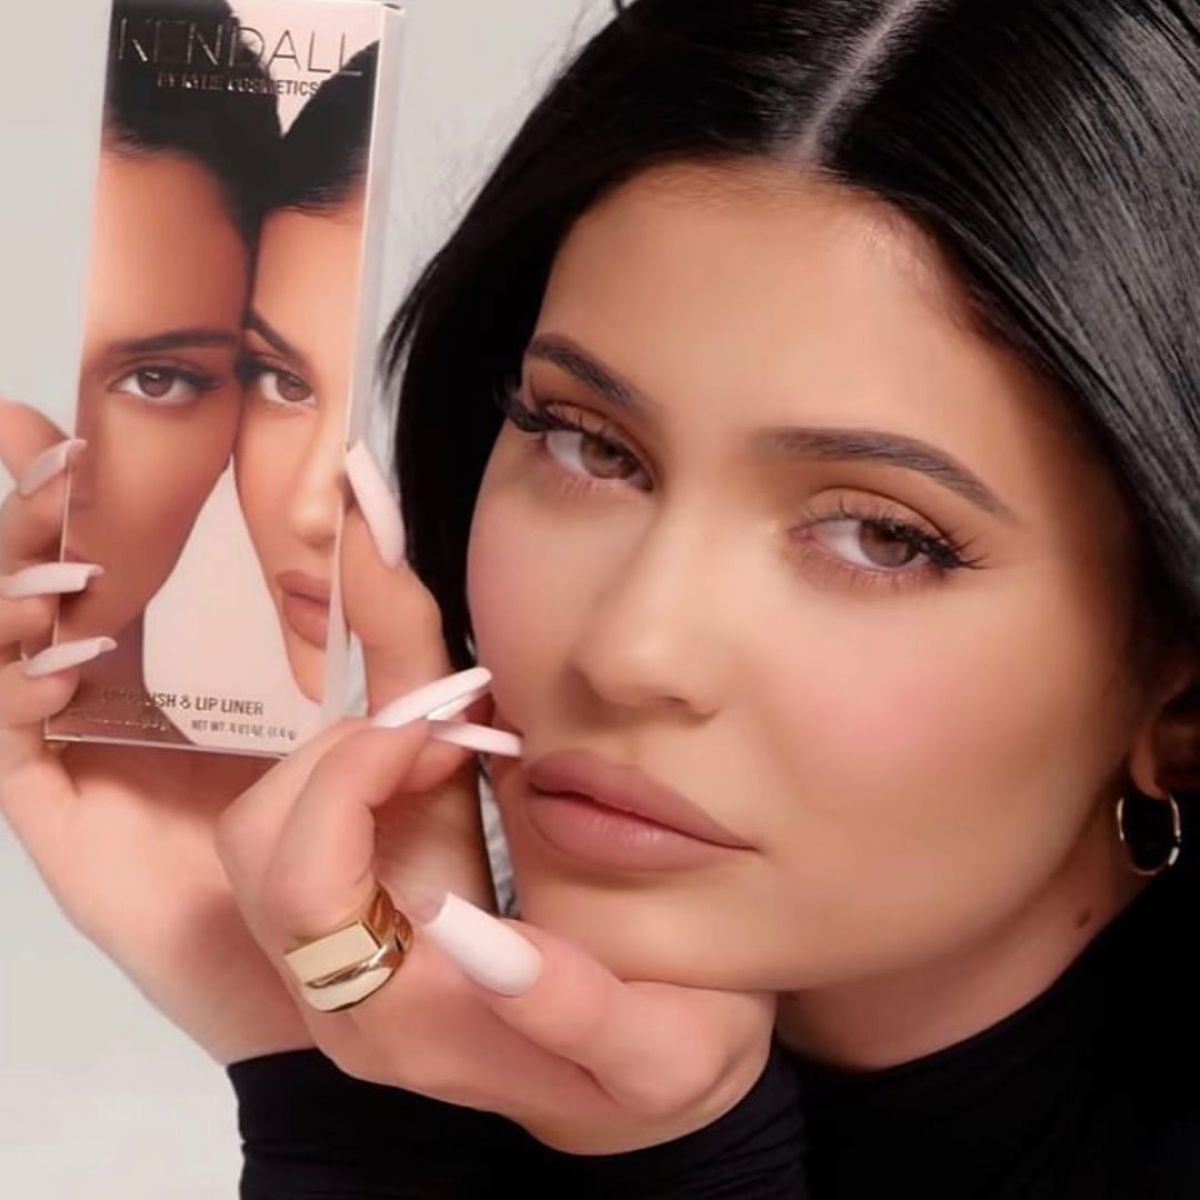 Kendall and Kylie Jenner for Kendall x Kylie 6.26 Kylie Cosmetics, 2020